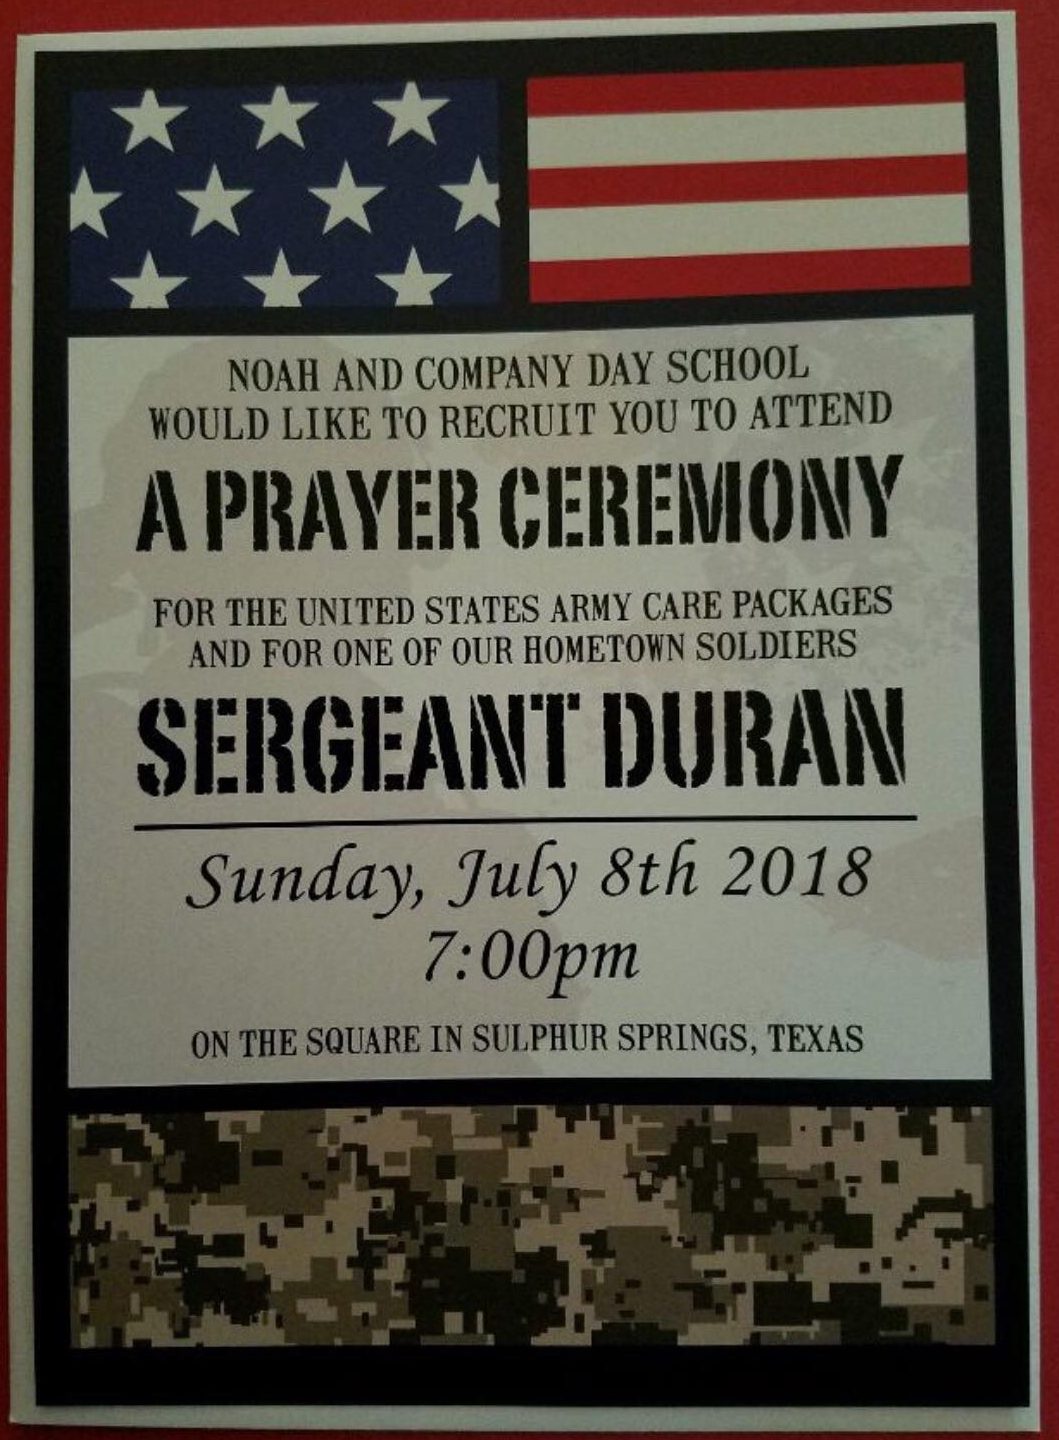 Prayer Ceremony for Army Care Packages and Sergeant Duran Being Held on The Square Sunday Night